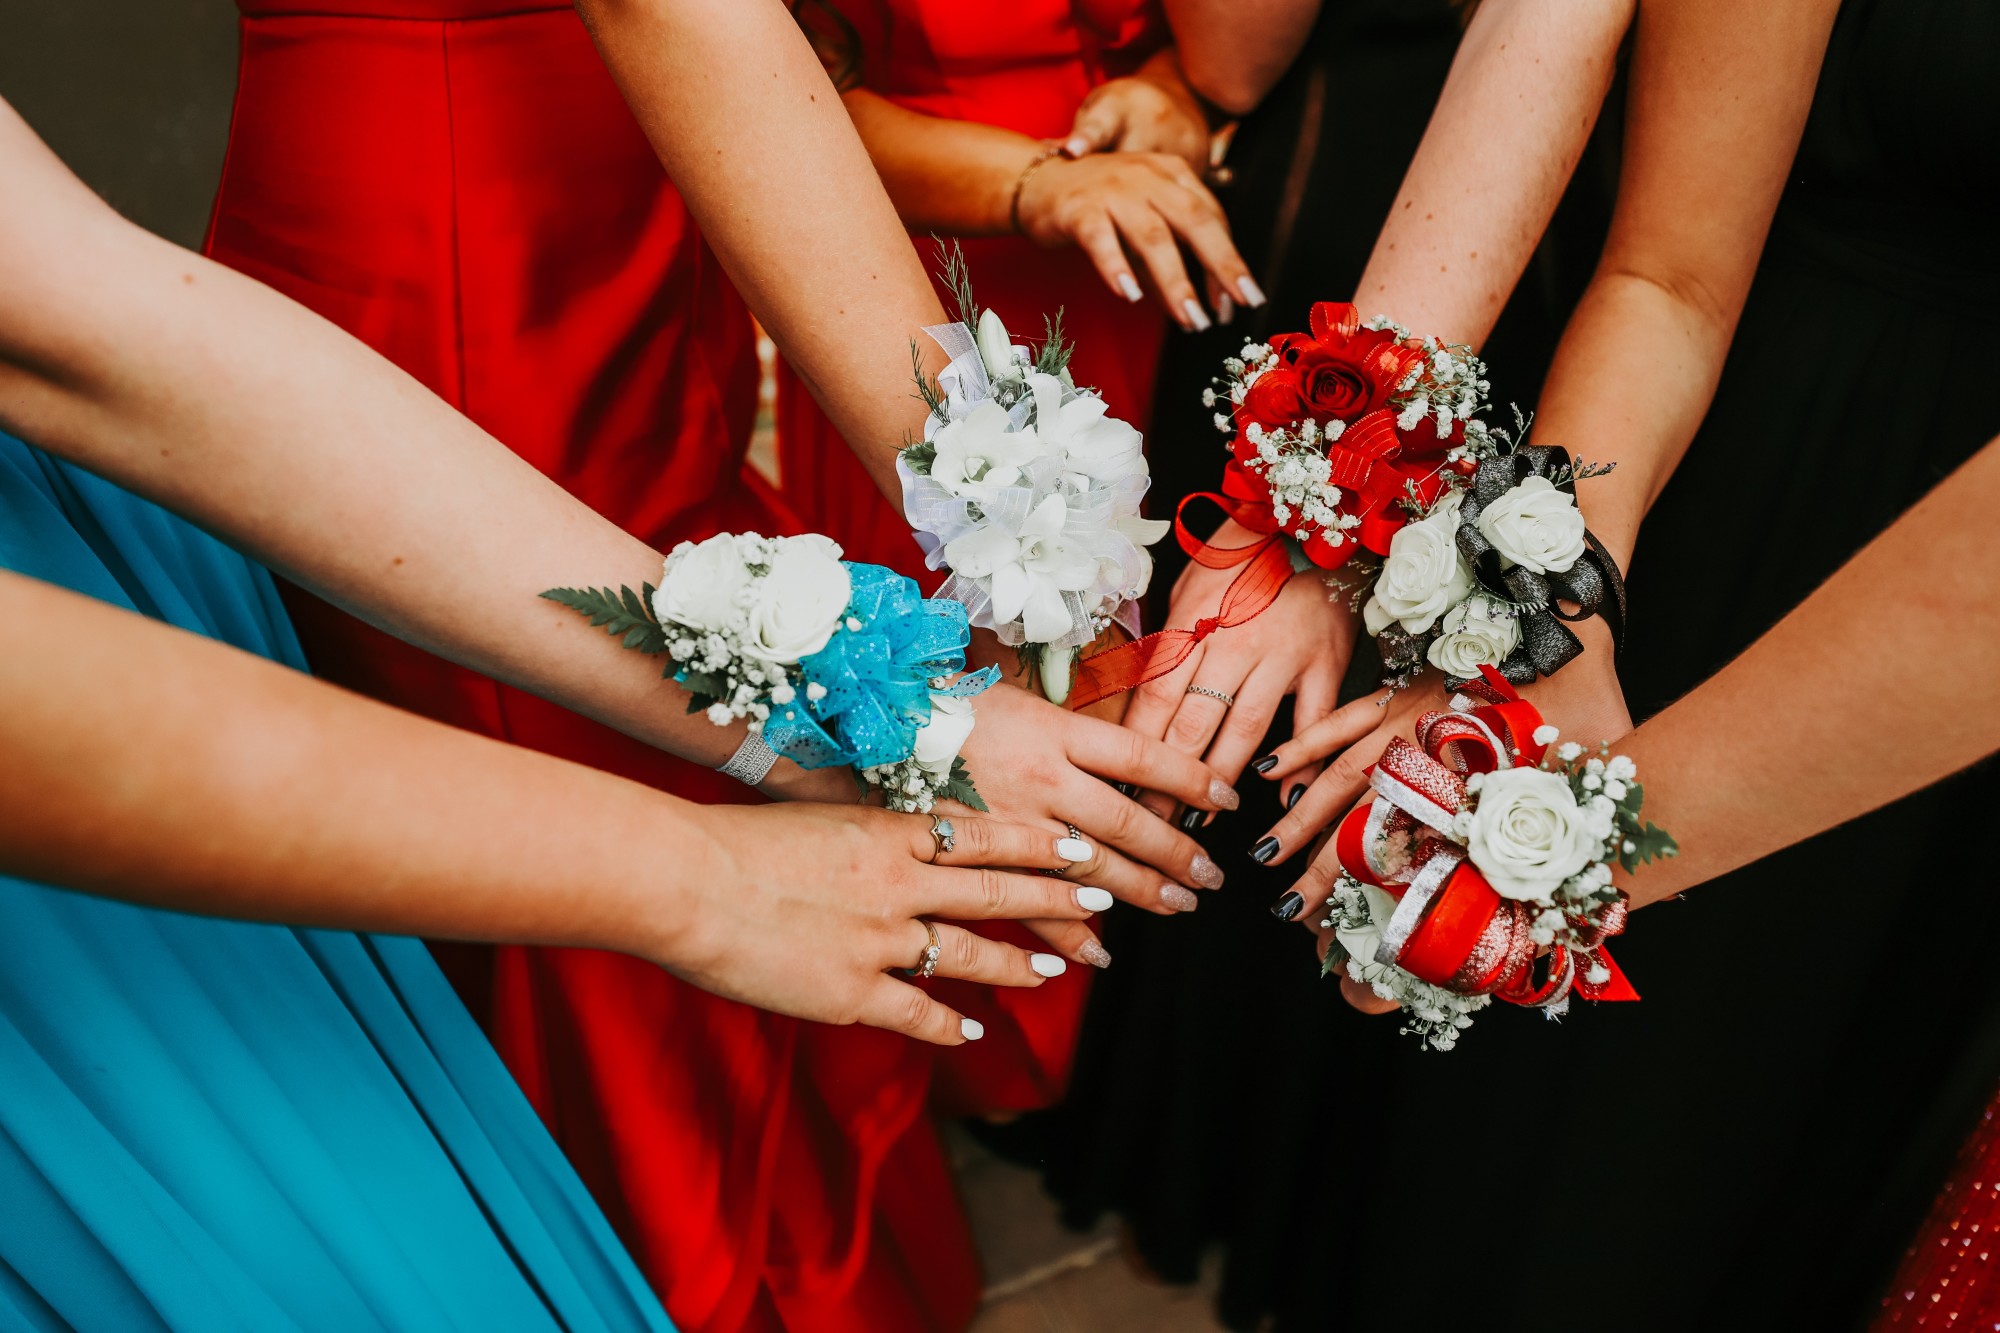 Girls Showing Their Corsage for a Prom